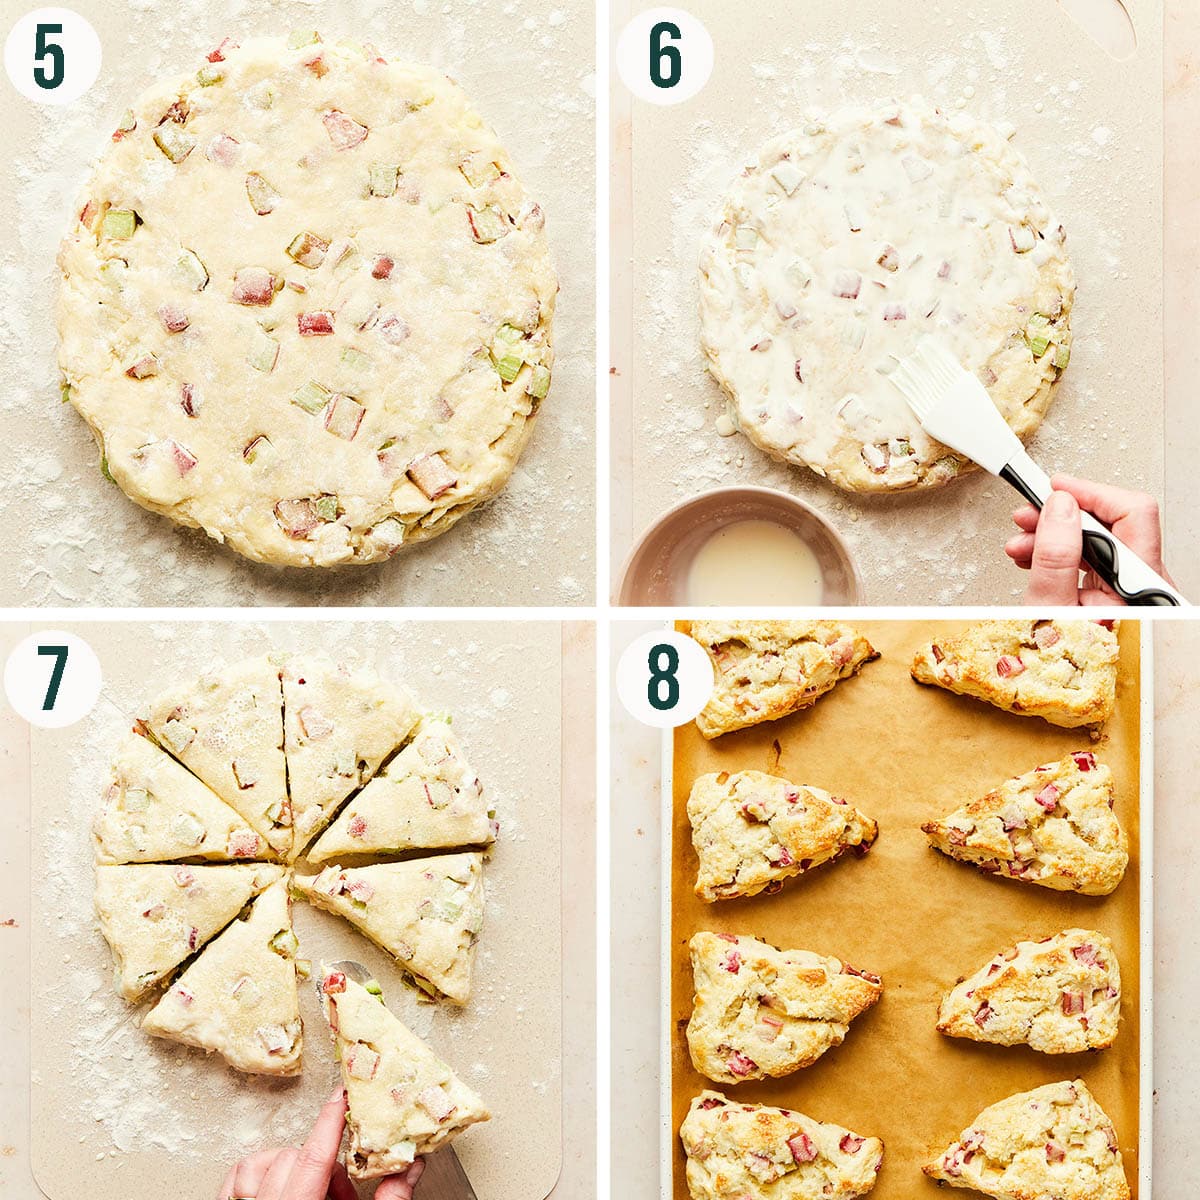 Scones steps 5 to 8, forming the dough into a disc, cutting, and baking.